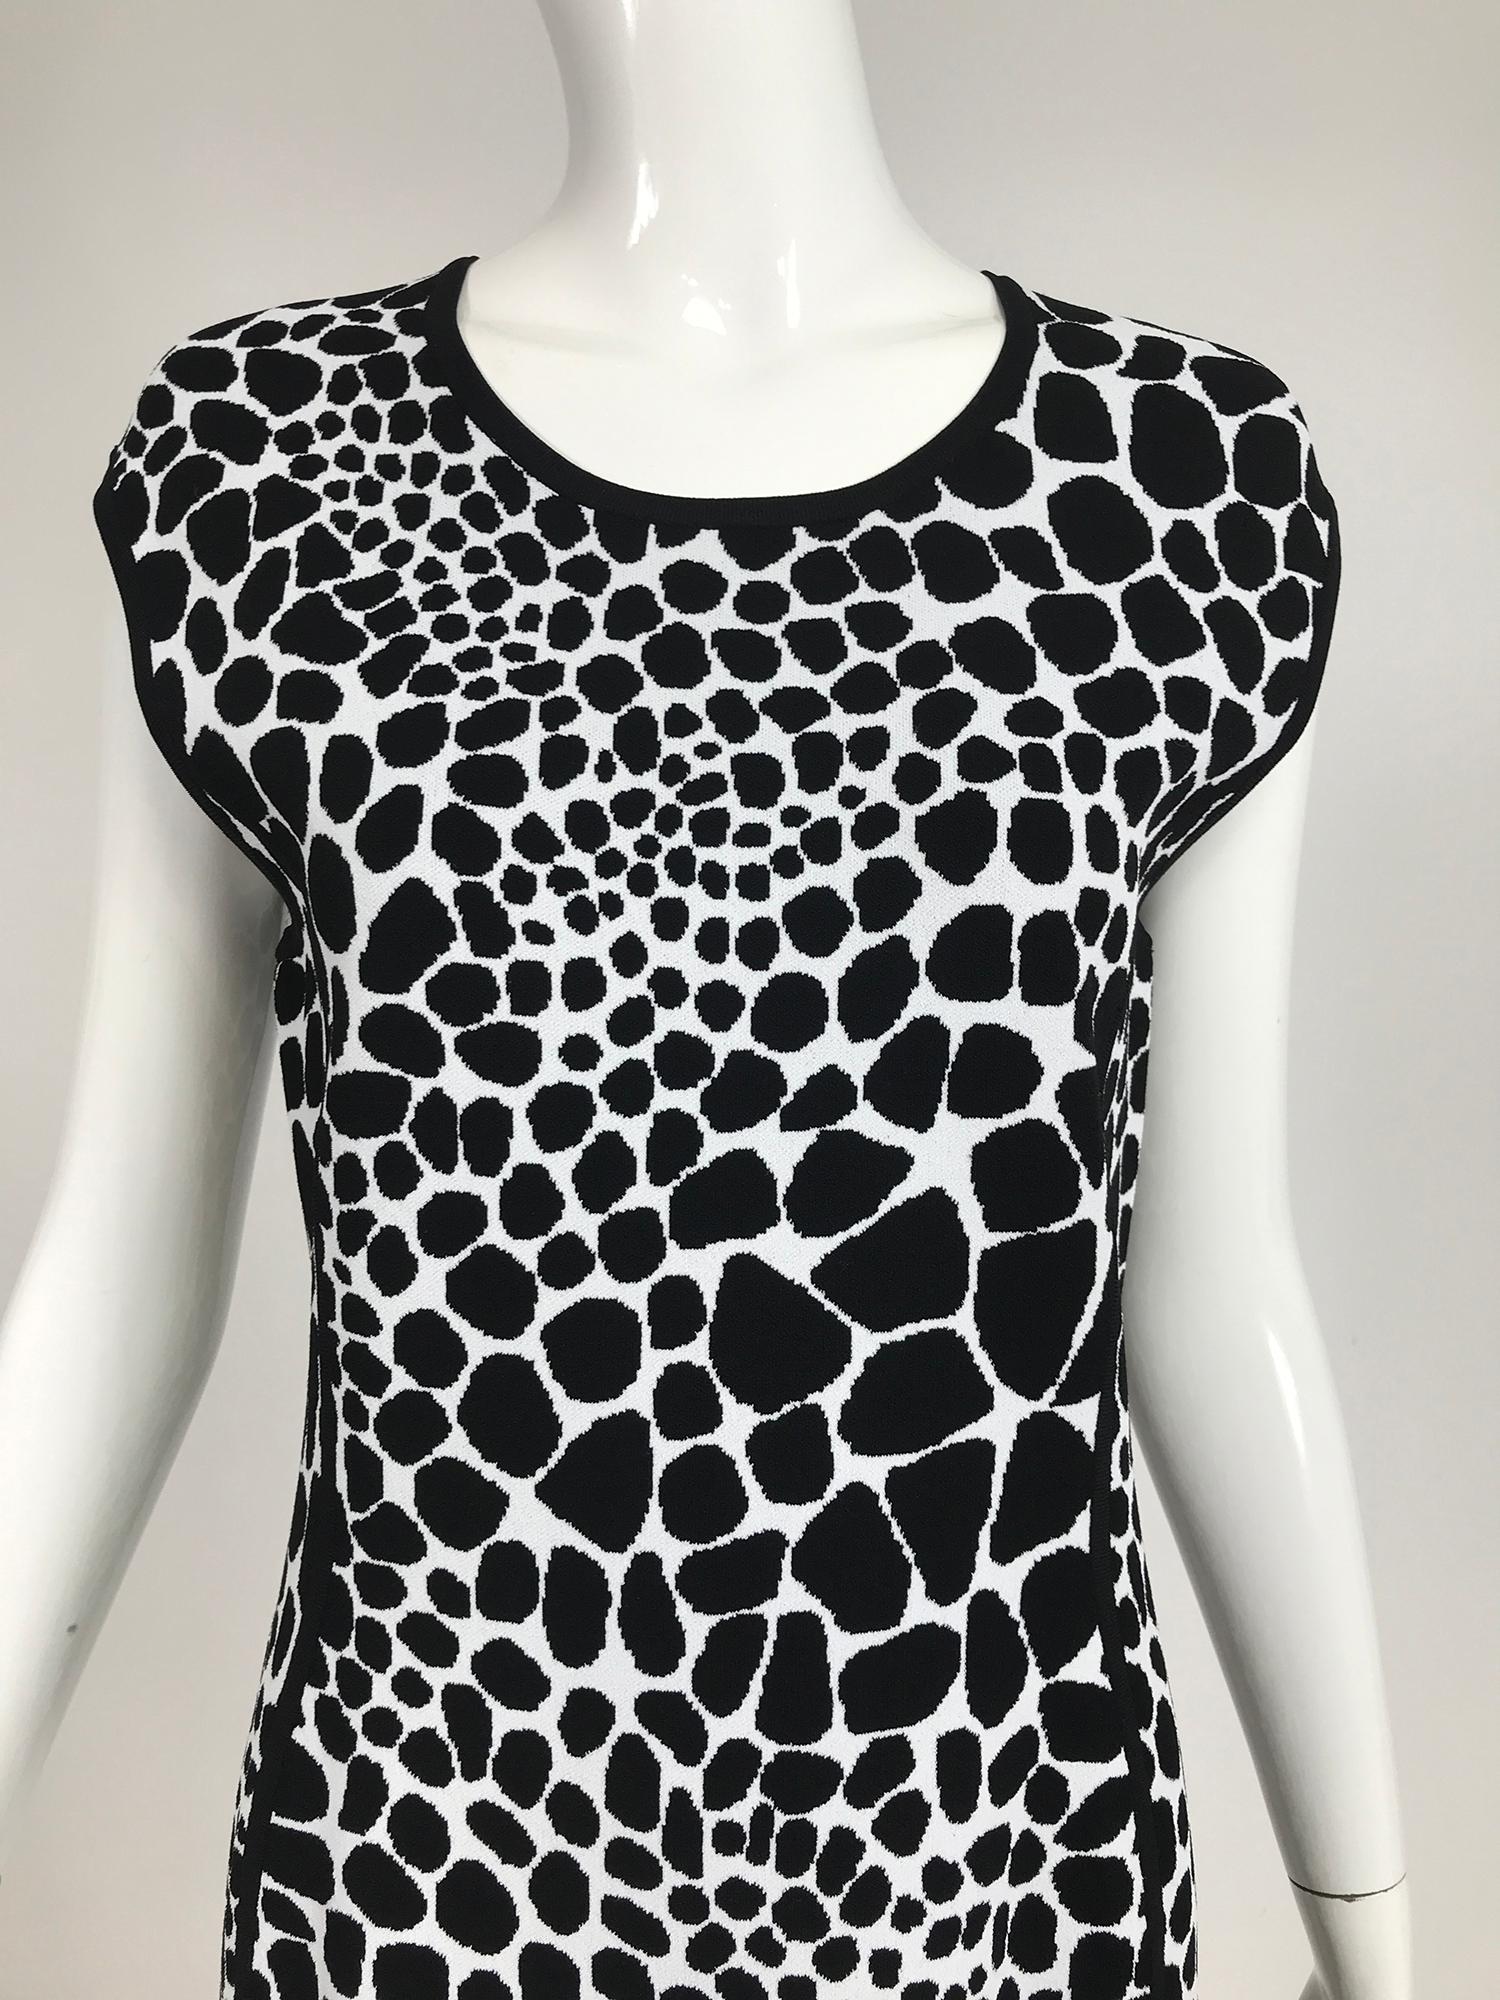 Michael Kors black & white knit stretch animal print dress. Pull on knit dress with a scoop neckline and cap sleeves and fitted silhouette. Princess seams and hem are highlighted in black cord ribbon knit. Unlined dress looks barely, if ever worn.